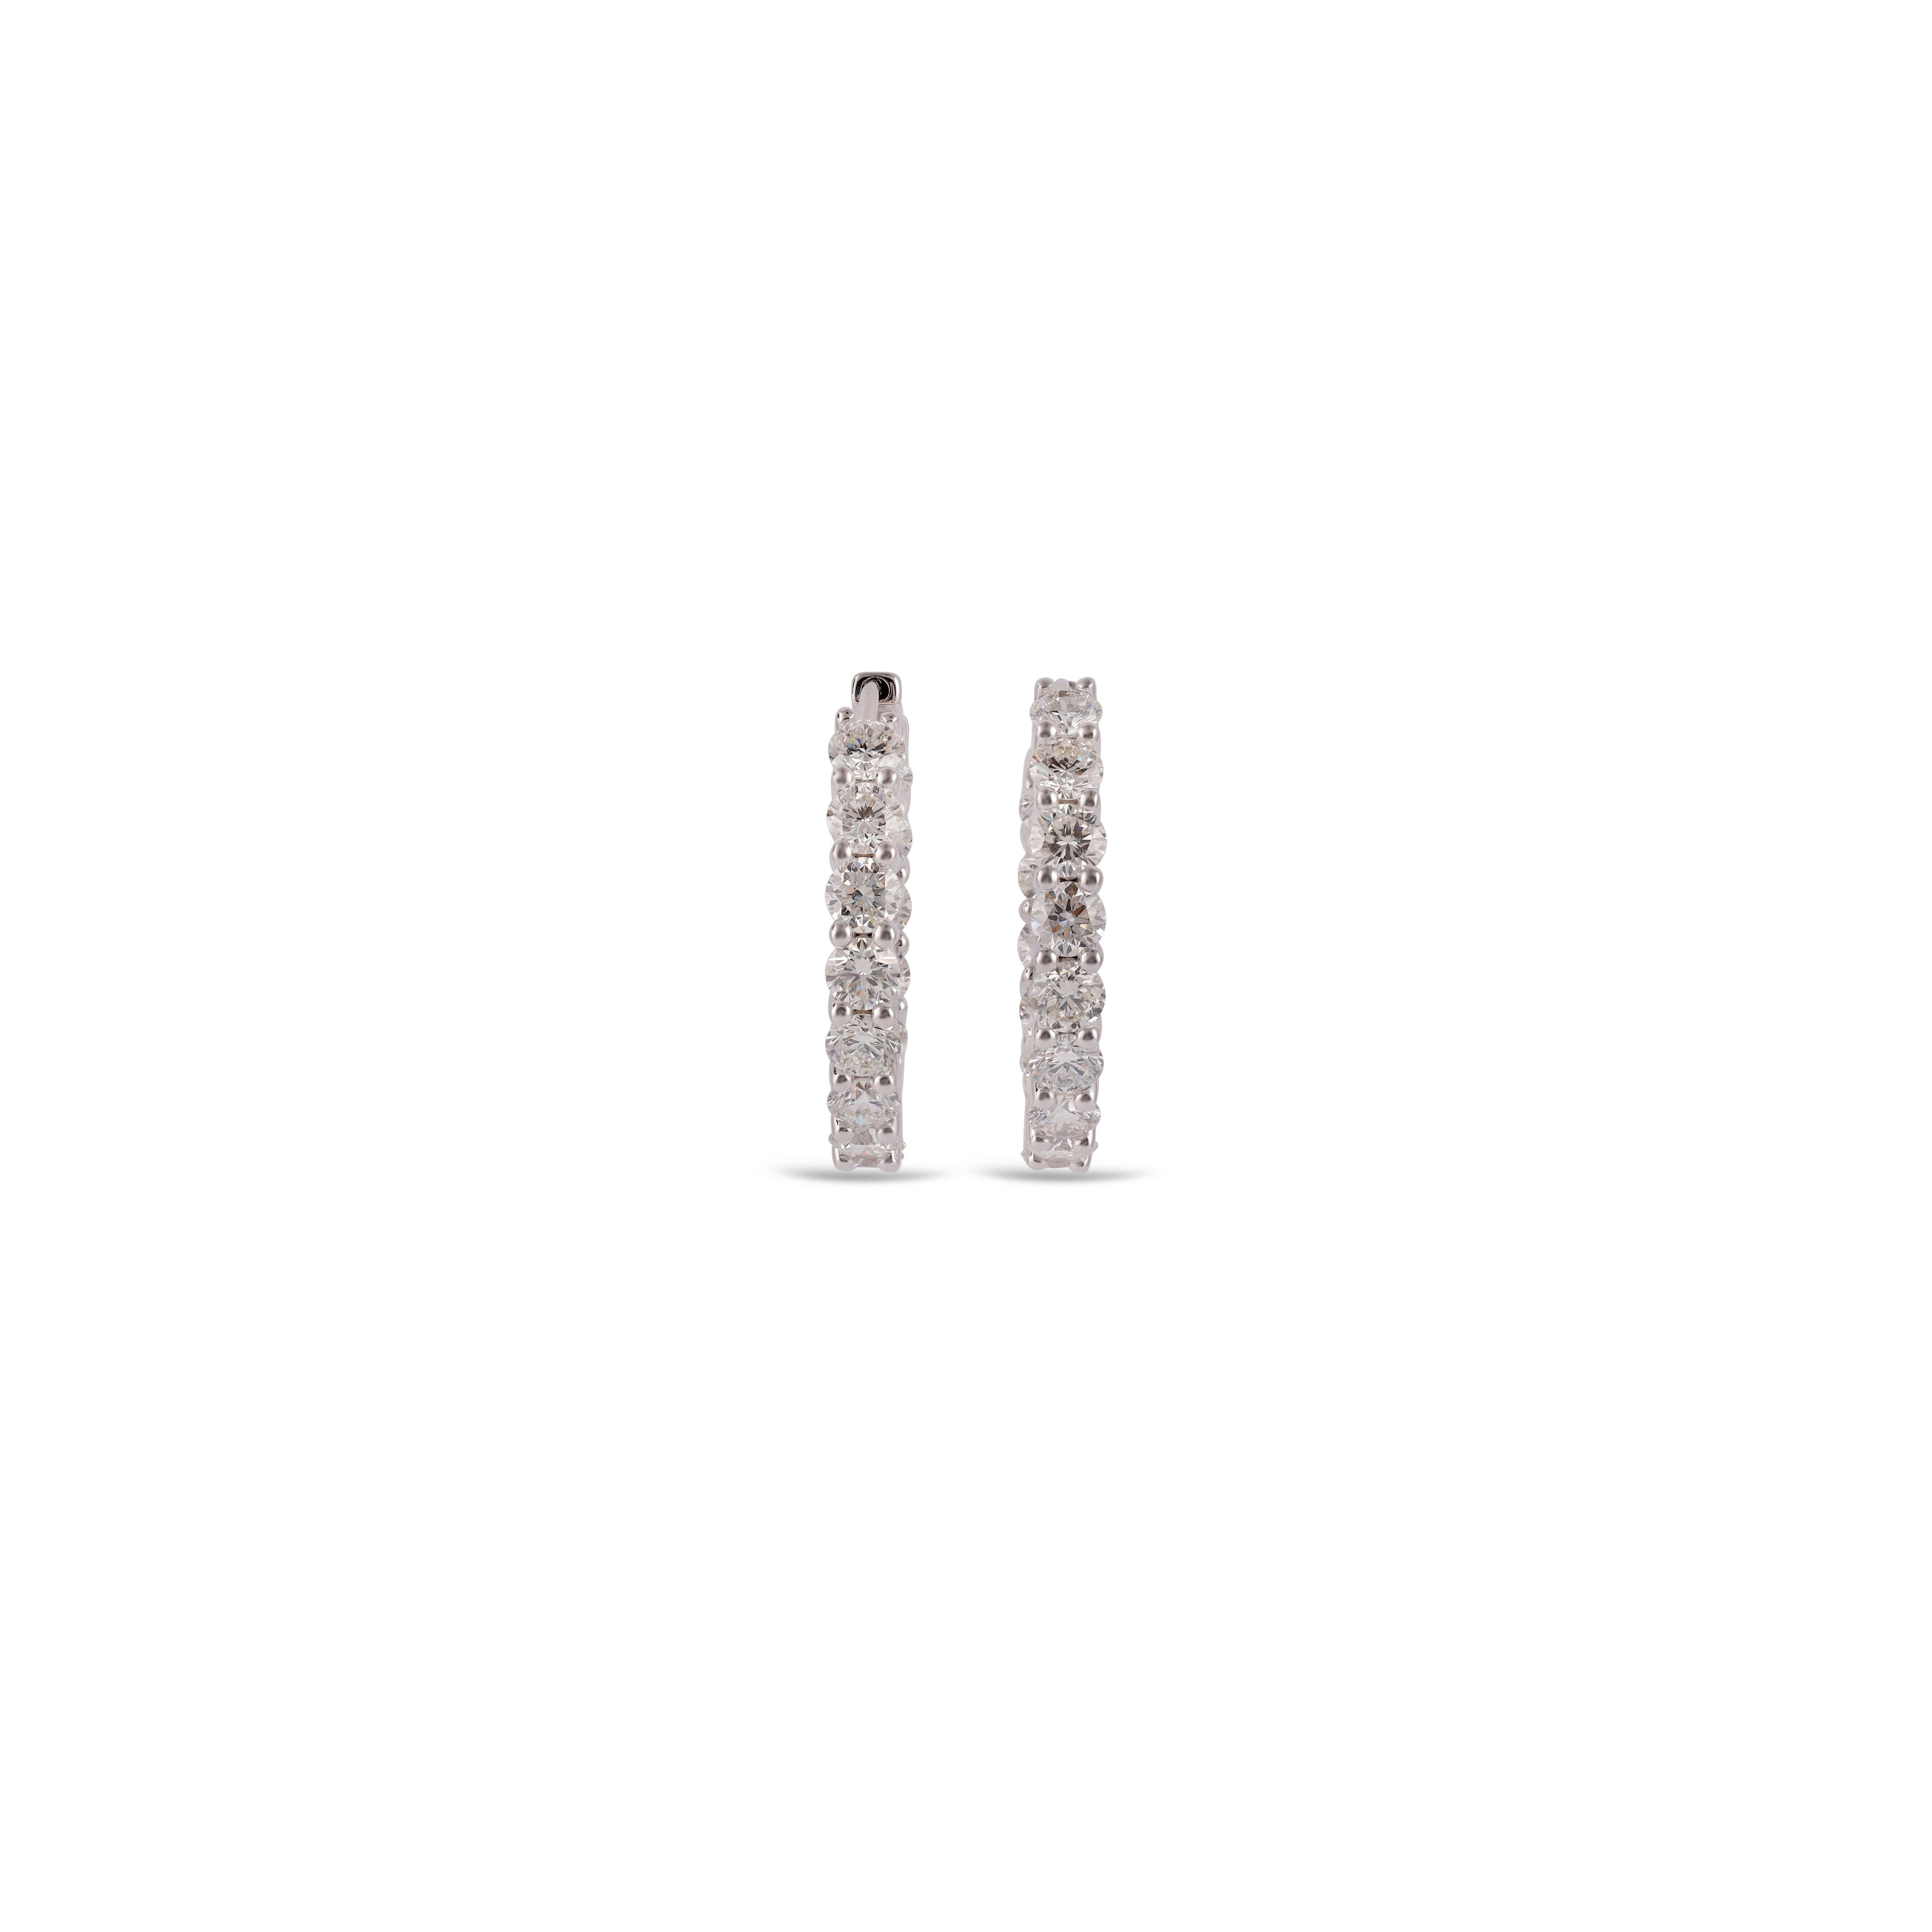 These are an exclusive earrings with diamonds features round  of diamonds weight 4.58 carats, These entire earrings are studded in 18k White gold.
 Earrings have a -----------//// 

VVS1 GH- COLOR 28 Pcs of Diamonds.


This Earring Come Along With